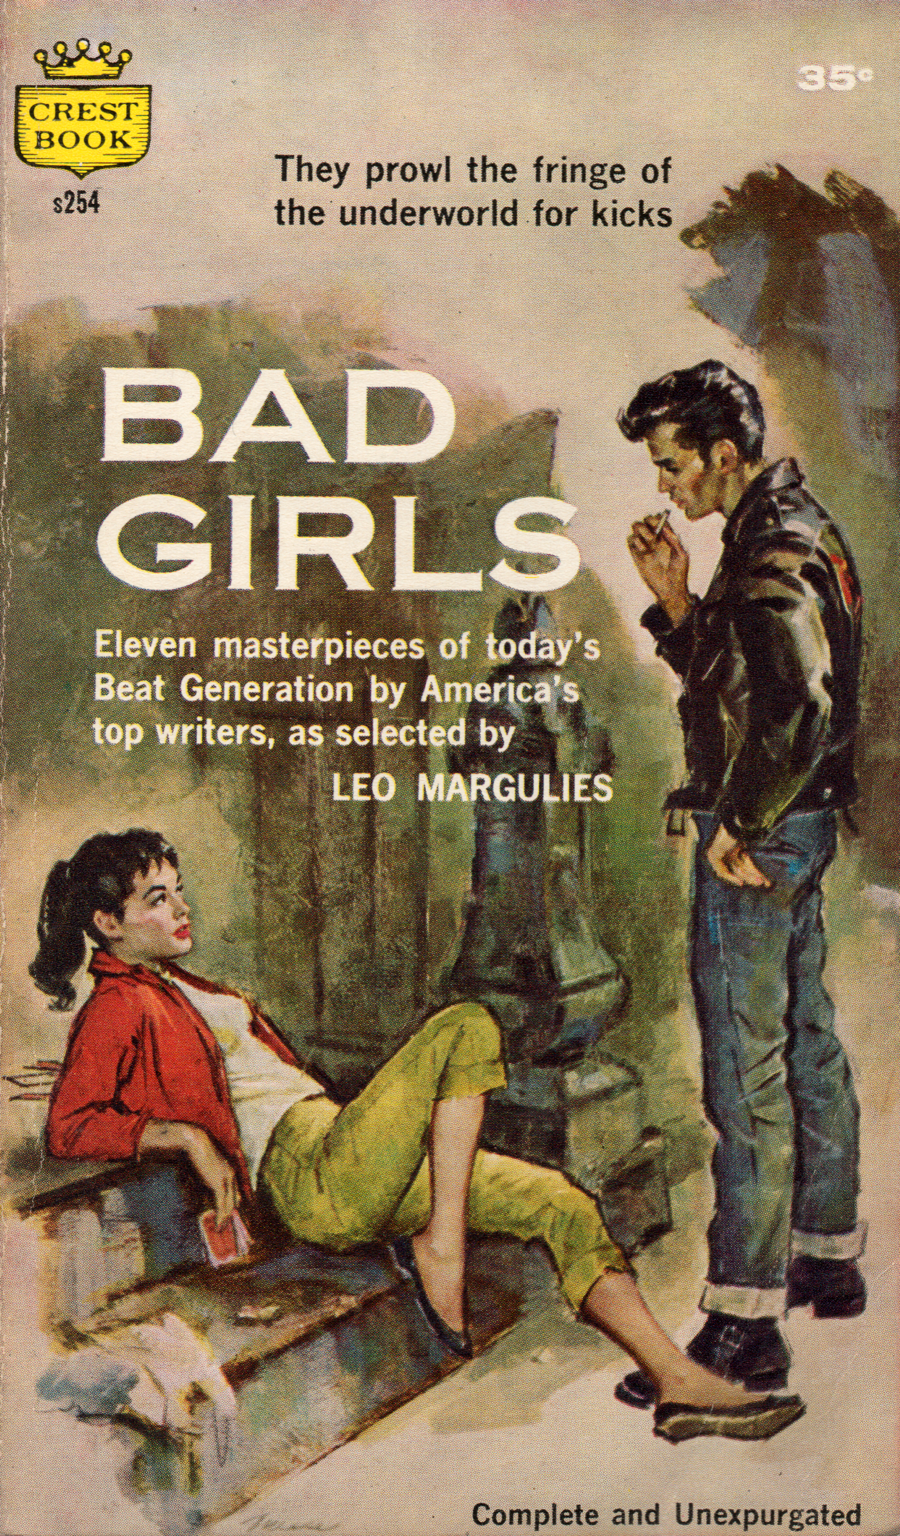 bad-girls-james-alfred-meese-pulp-fiction-art.png